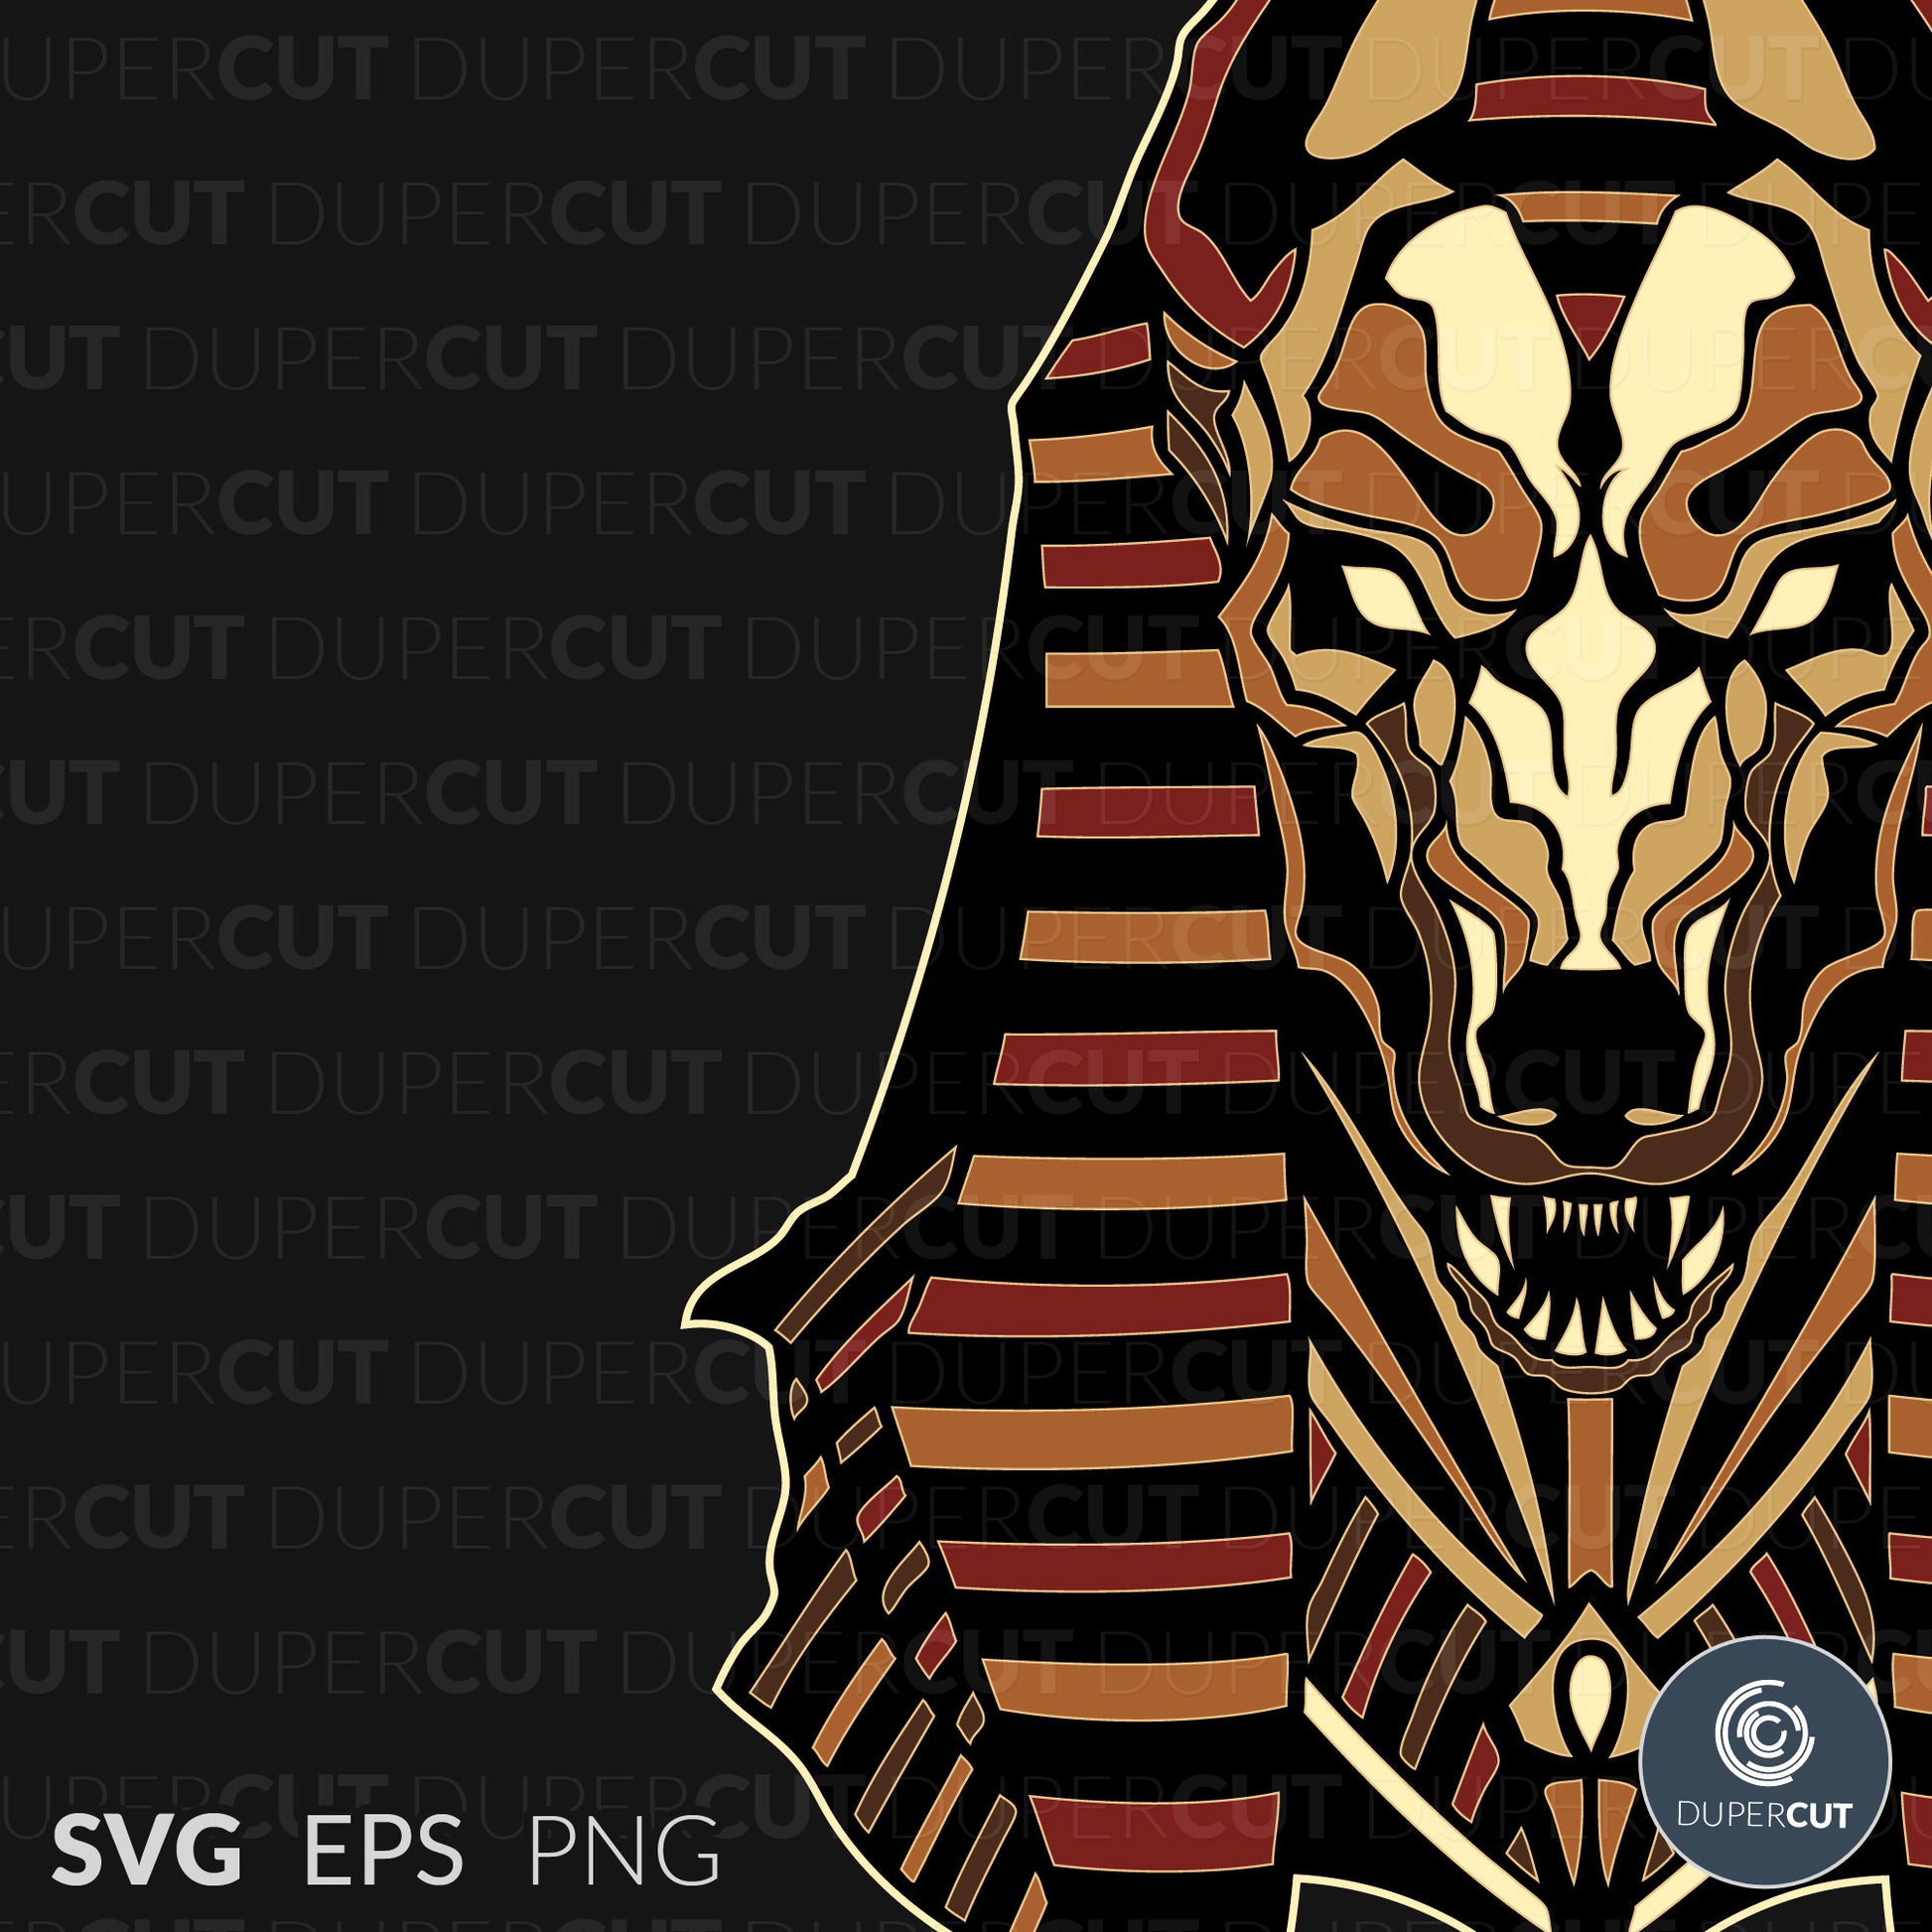 Vector Anubis -EPS, SVG, PNG files. Colour illustration for print on demand, sublimation, custom t-shirts, hoodies, tumblers.